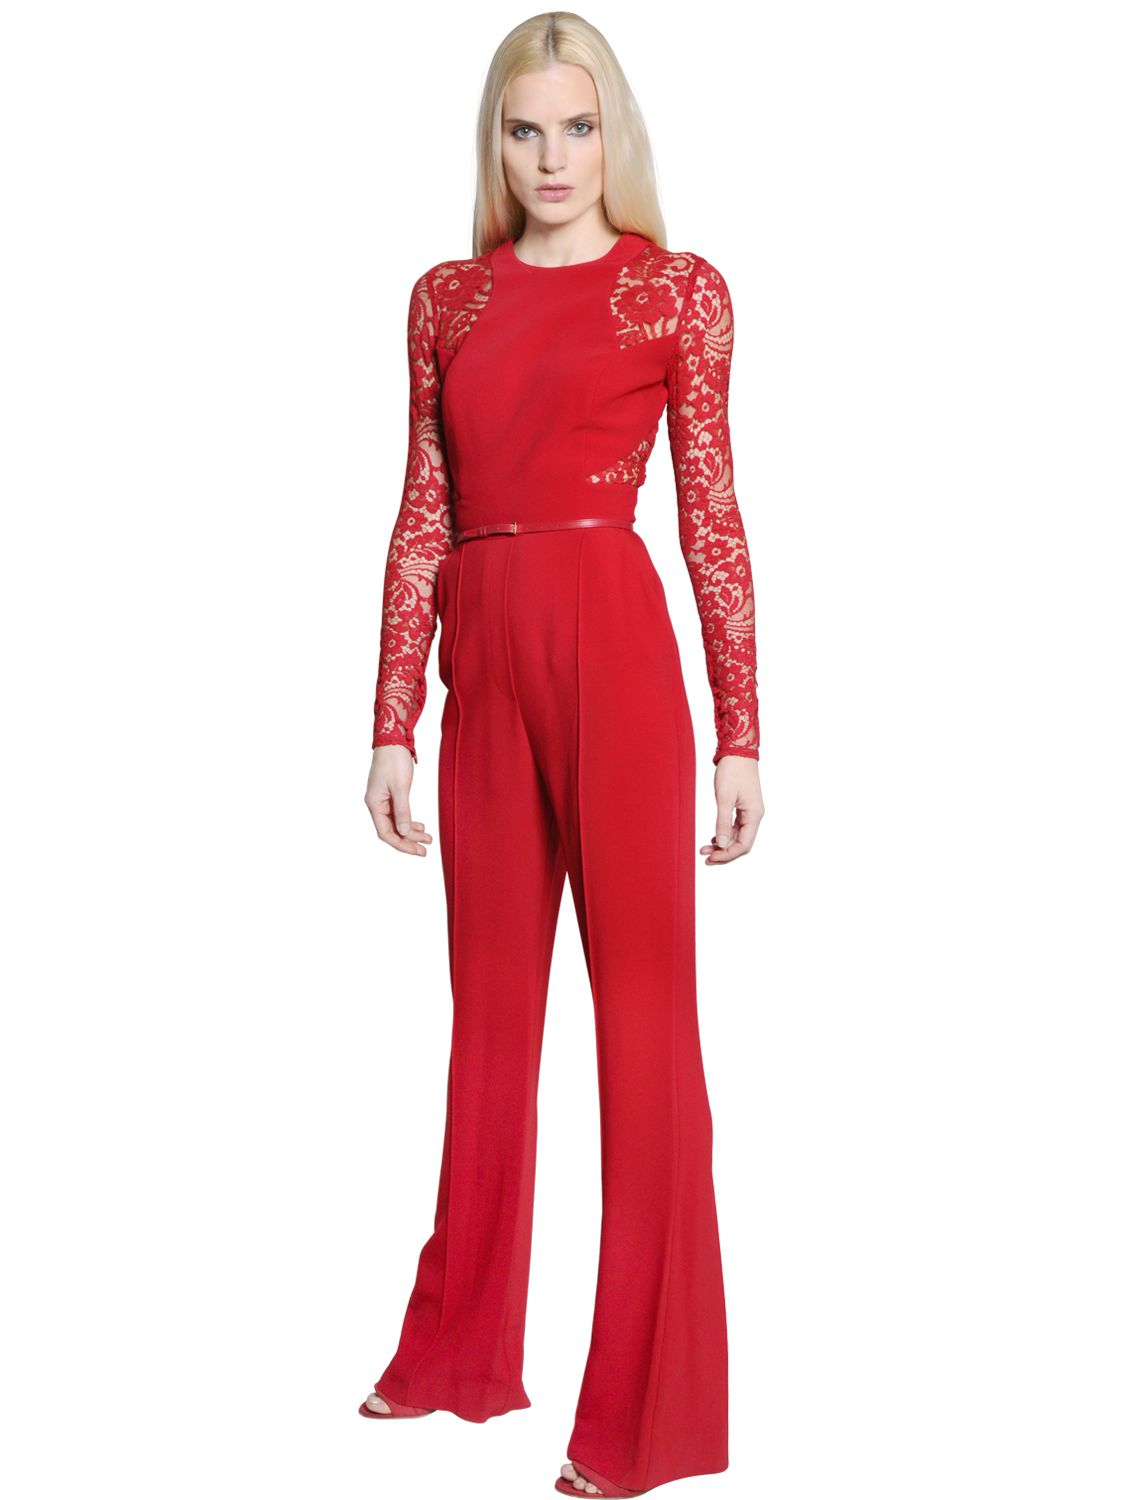 Lyst - Elie Saab Lace & Crepe Cady Jumpsuit in Red